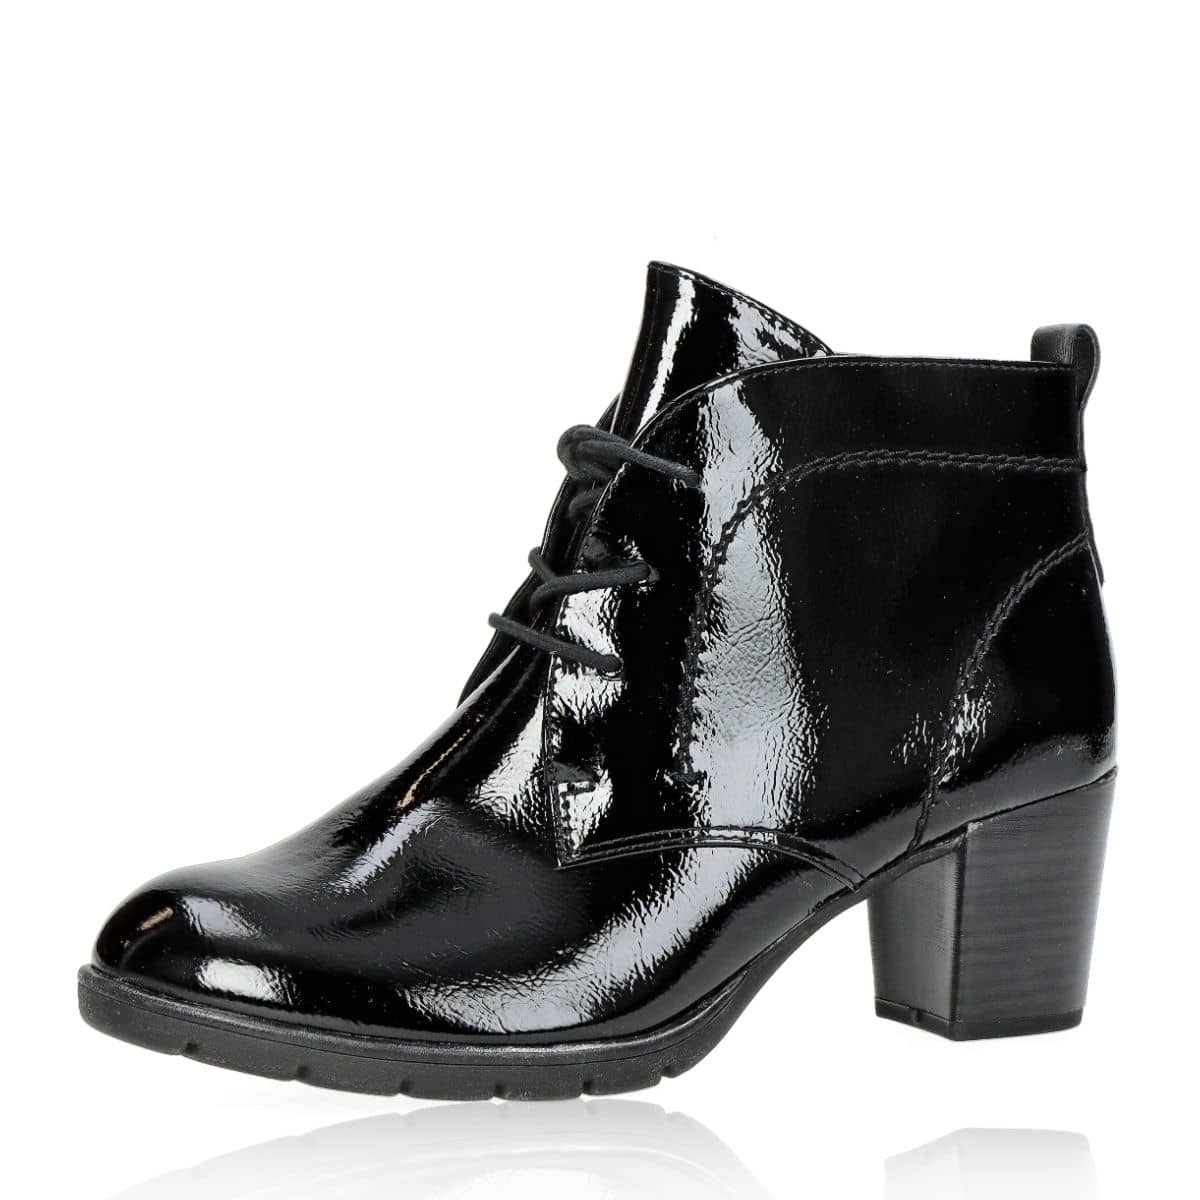 Anzai Omkleden Handschrift Marco Tozzi women´s shiny ankle boots for lacing - black | Robel.shoes